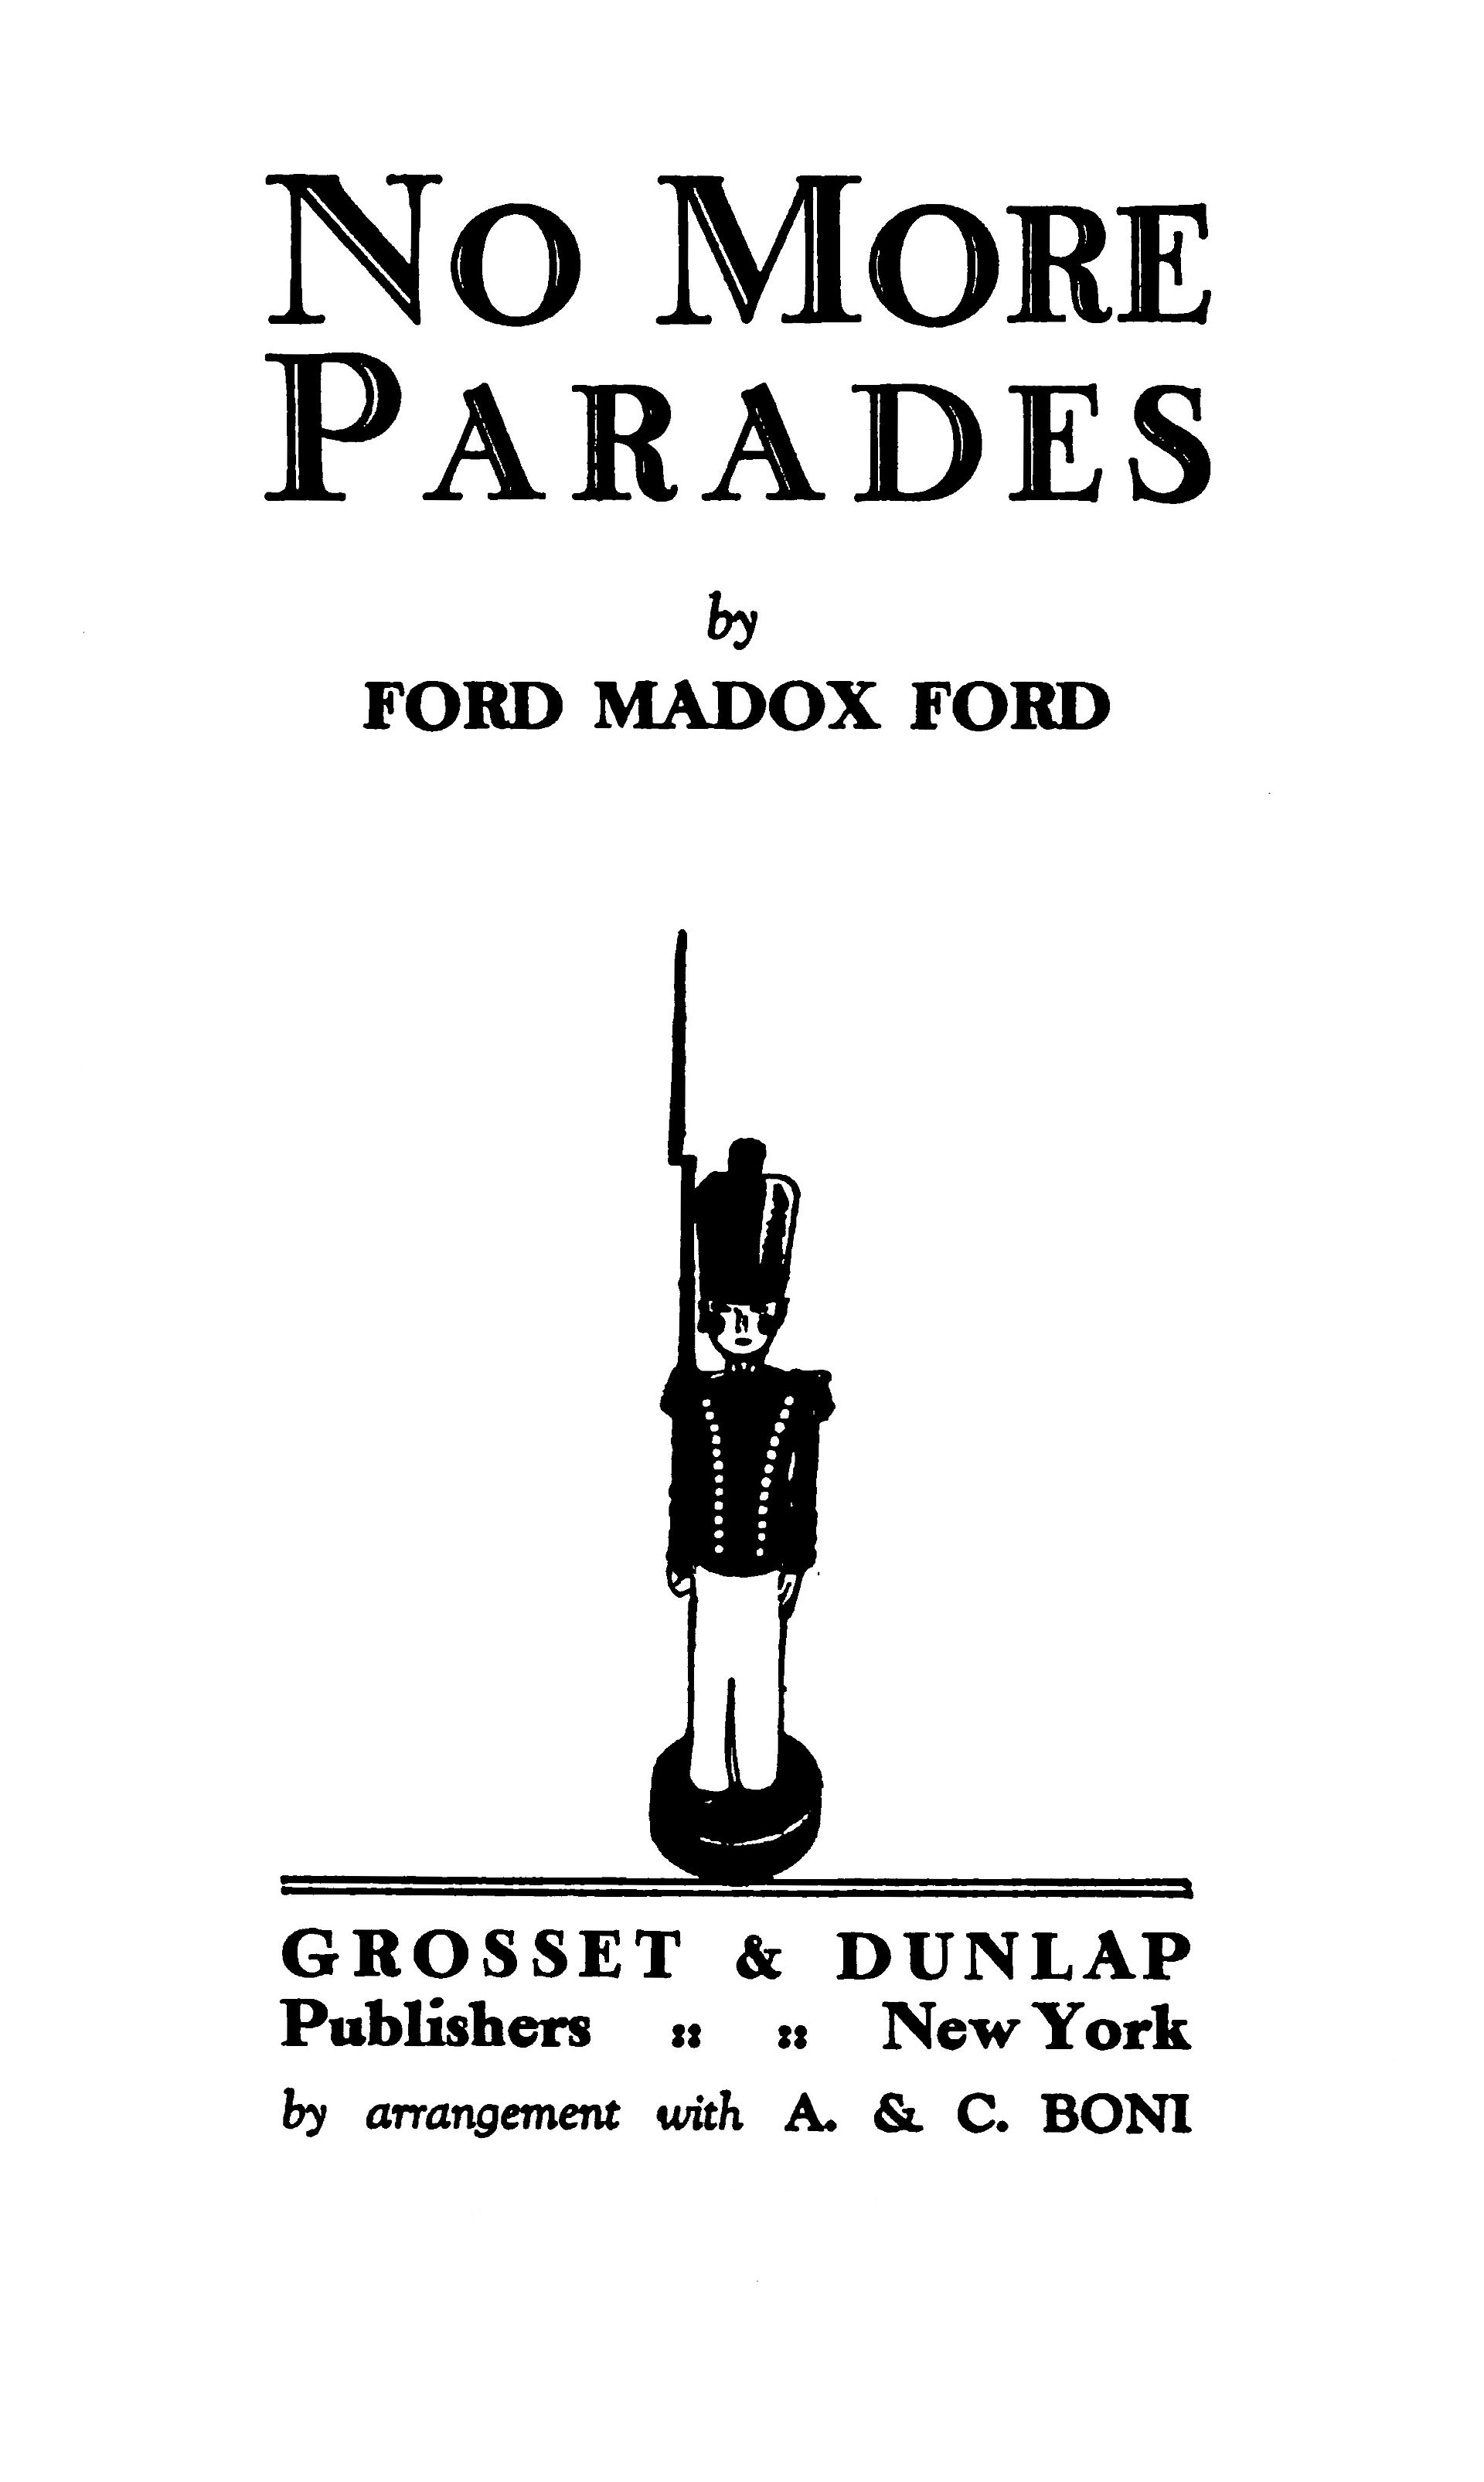 The Project Gutenberg eBook of No More Parades, by Ford Madox Ford. photo